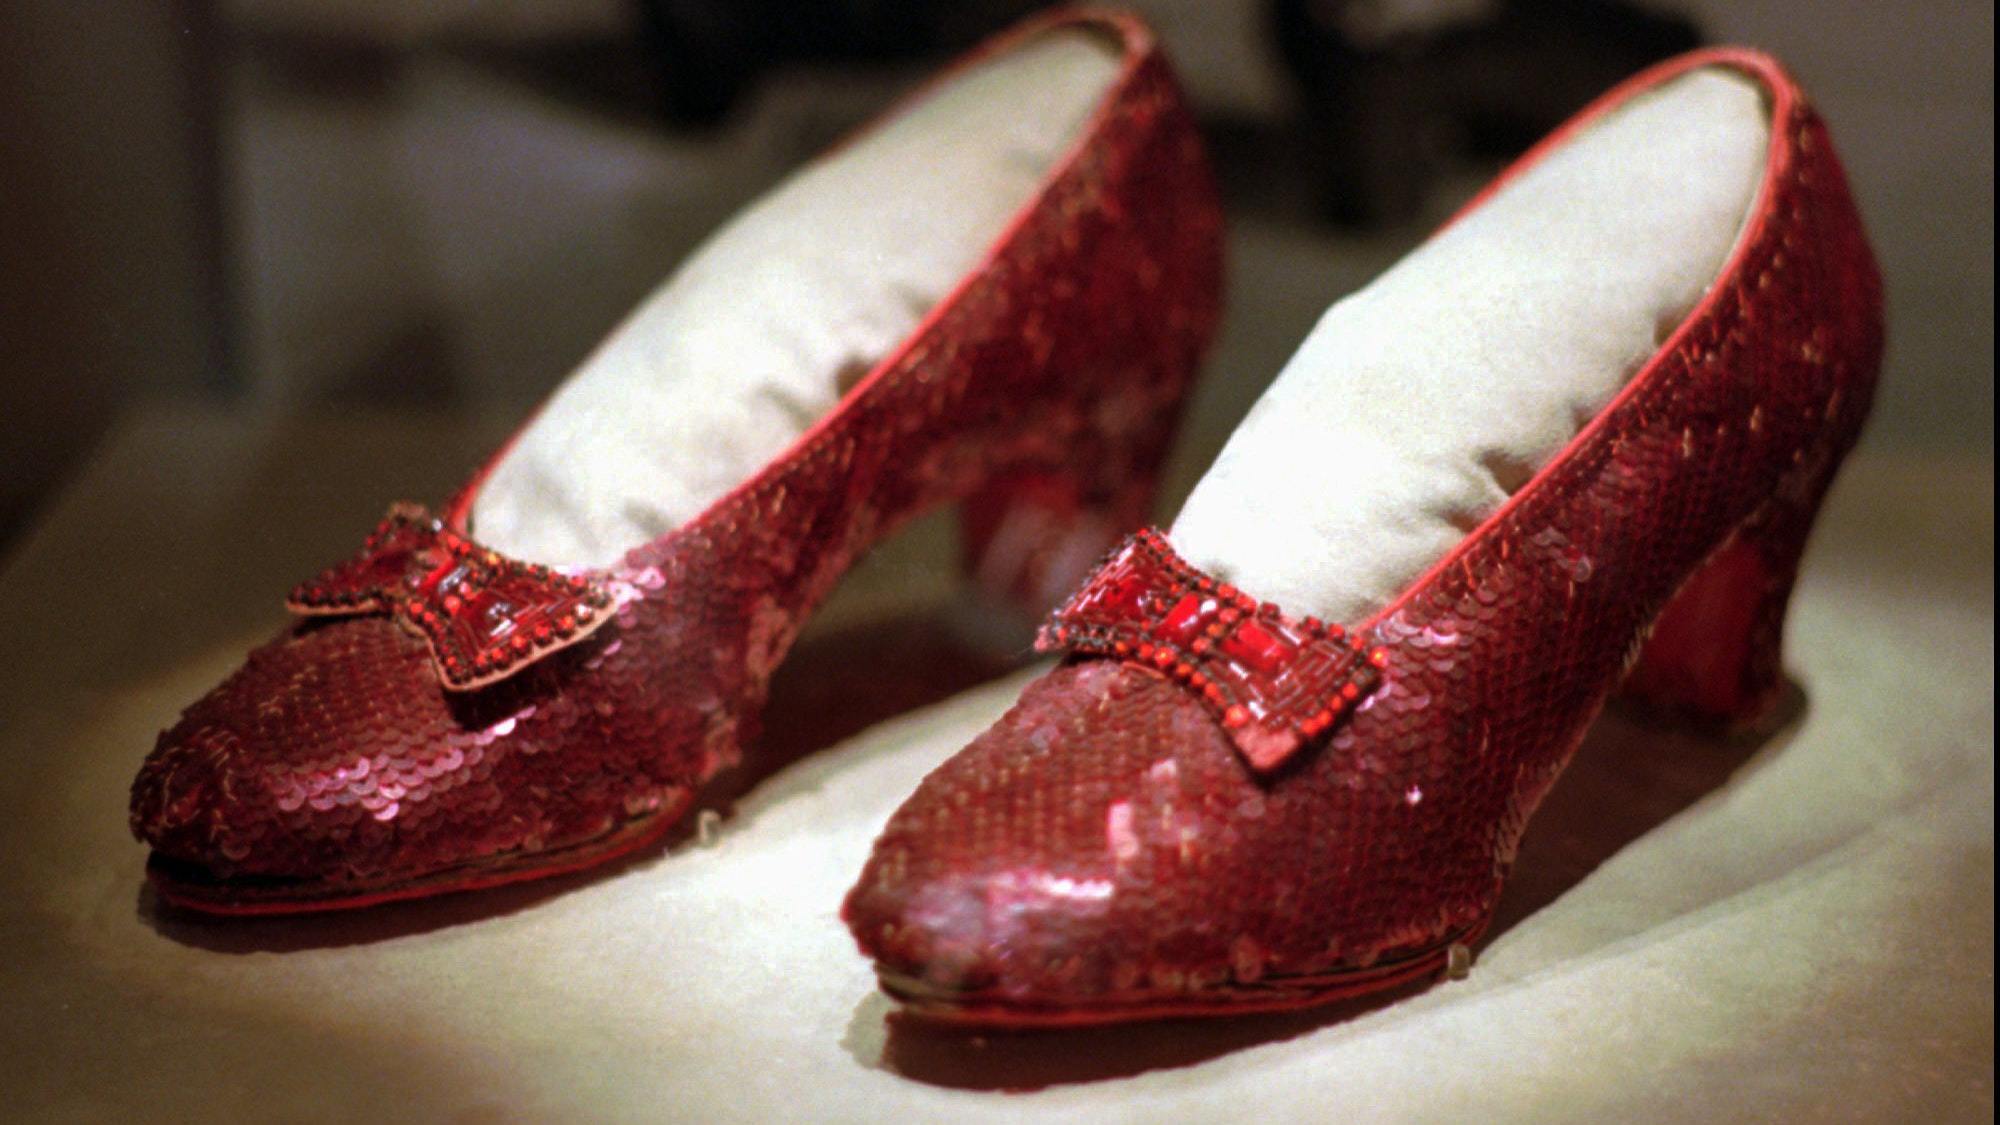 The slippers were taken from the Judy Garland Museum in Minnesota in August 2005